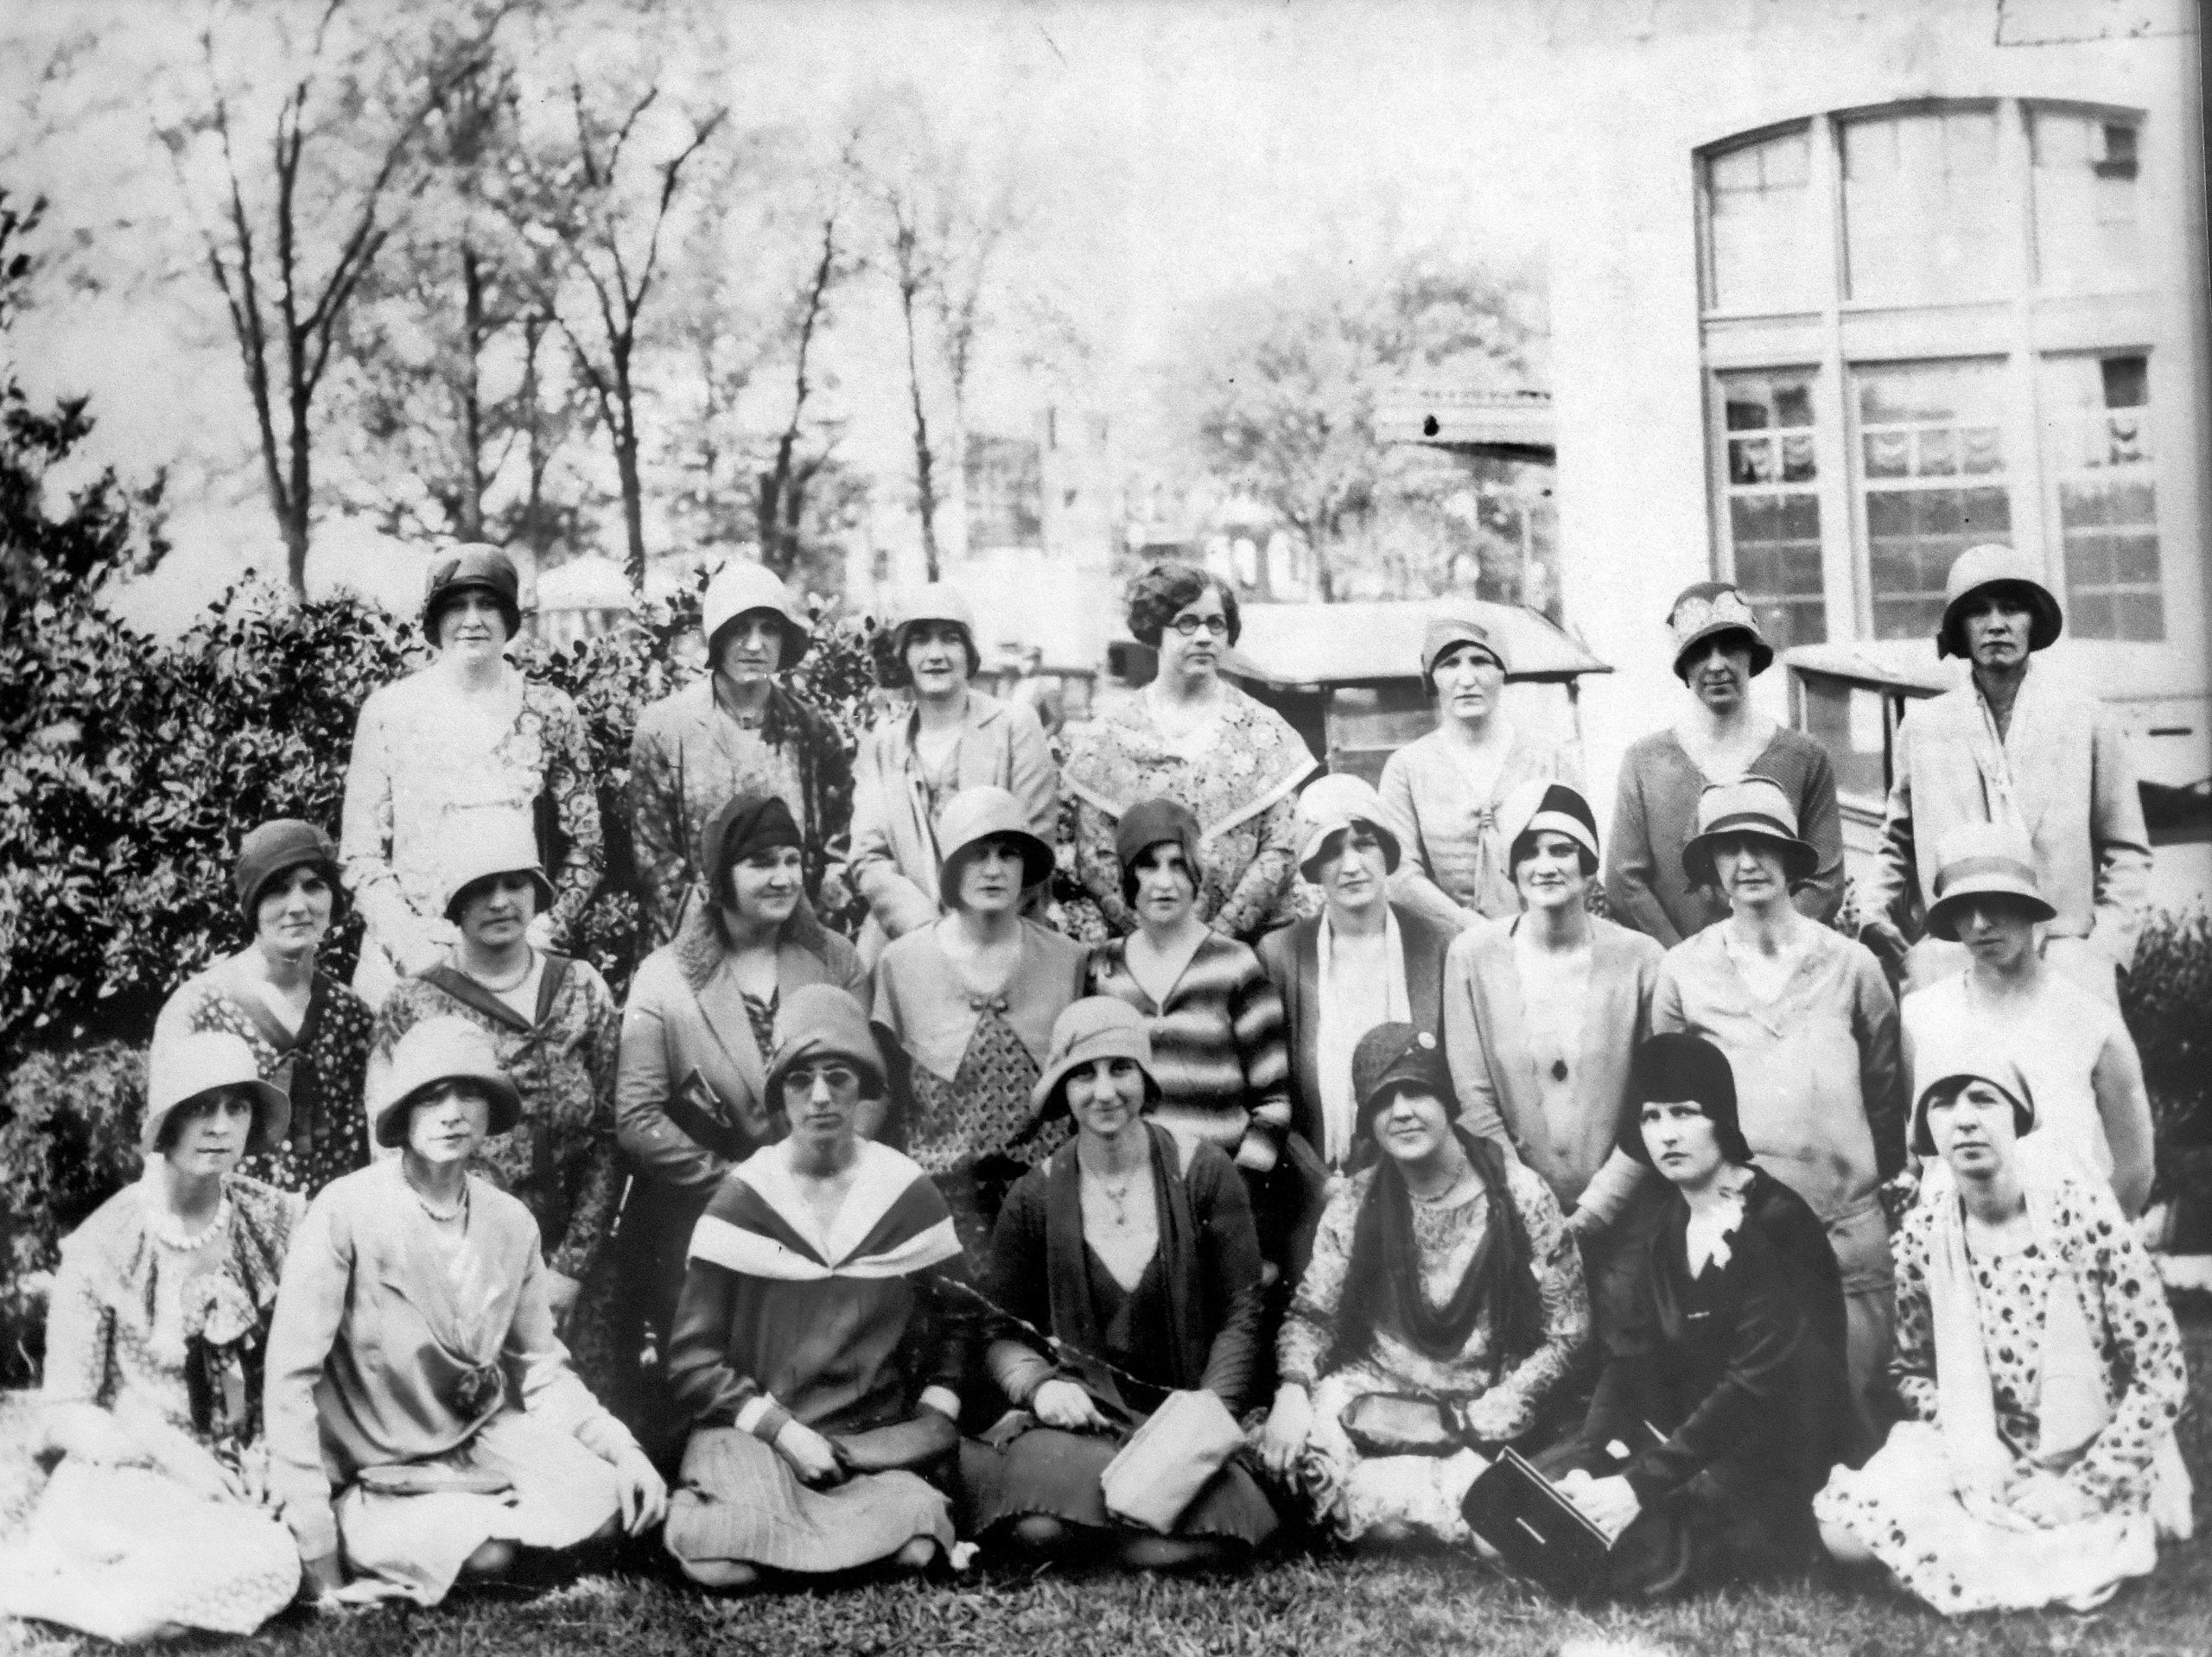 A historic photo of the Junior League of High Point.